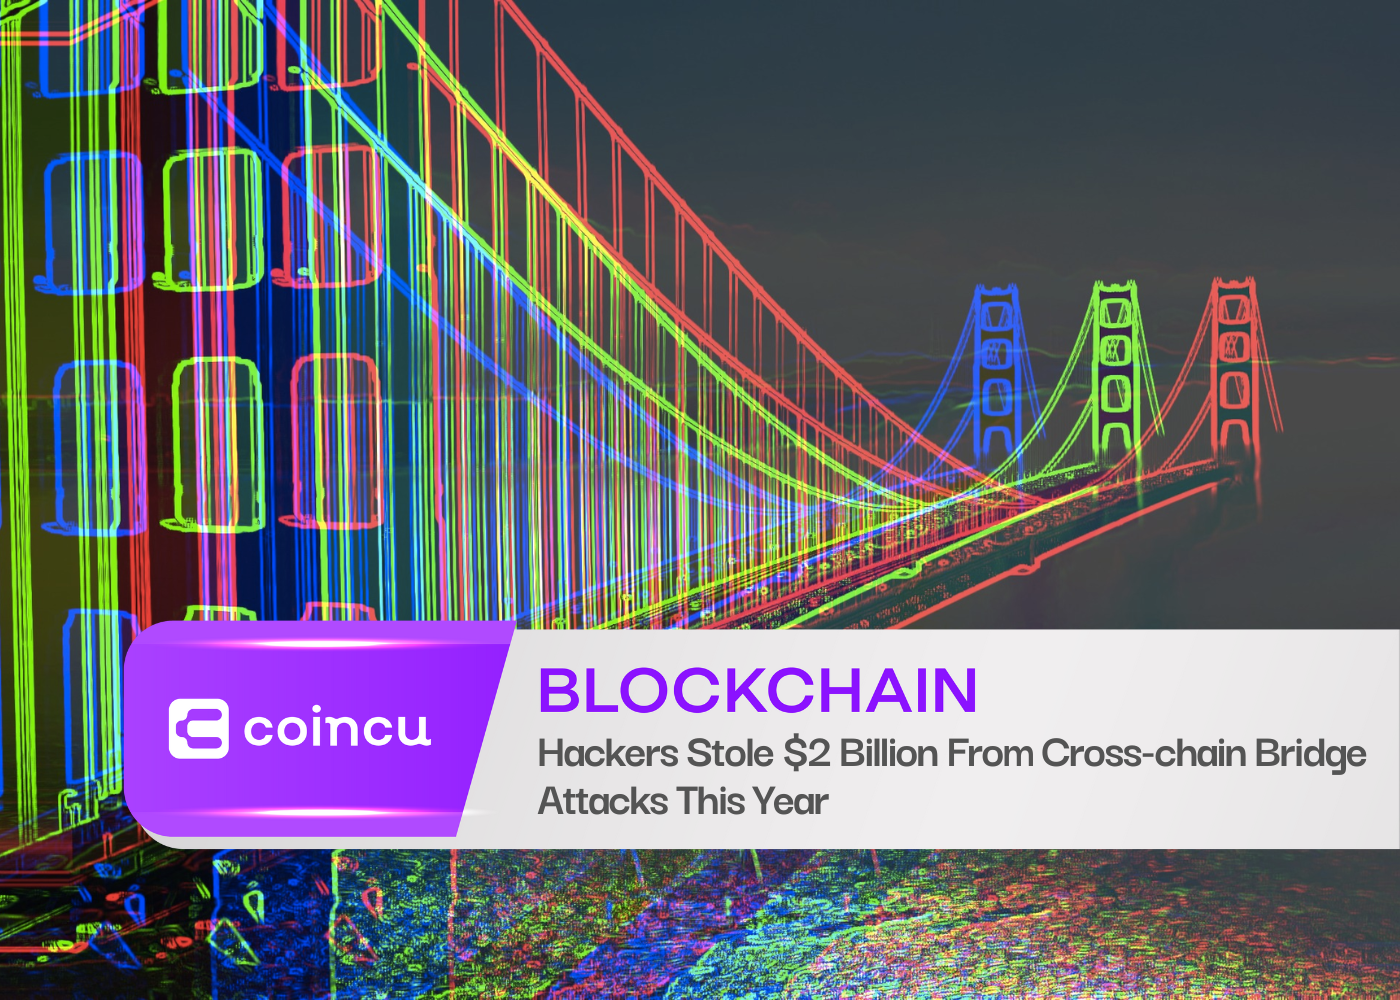 Hackers Stole $2 Billion From Cross-chain Bridge Attacks This Year